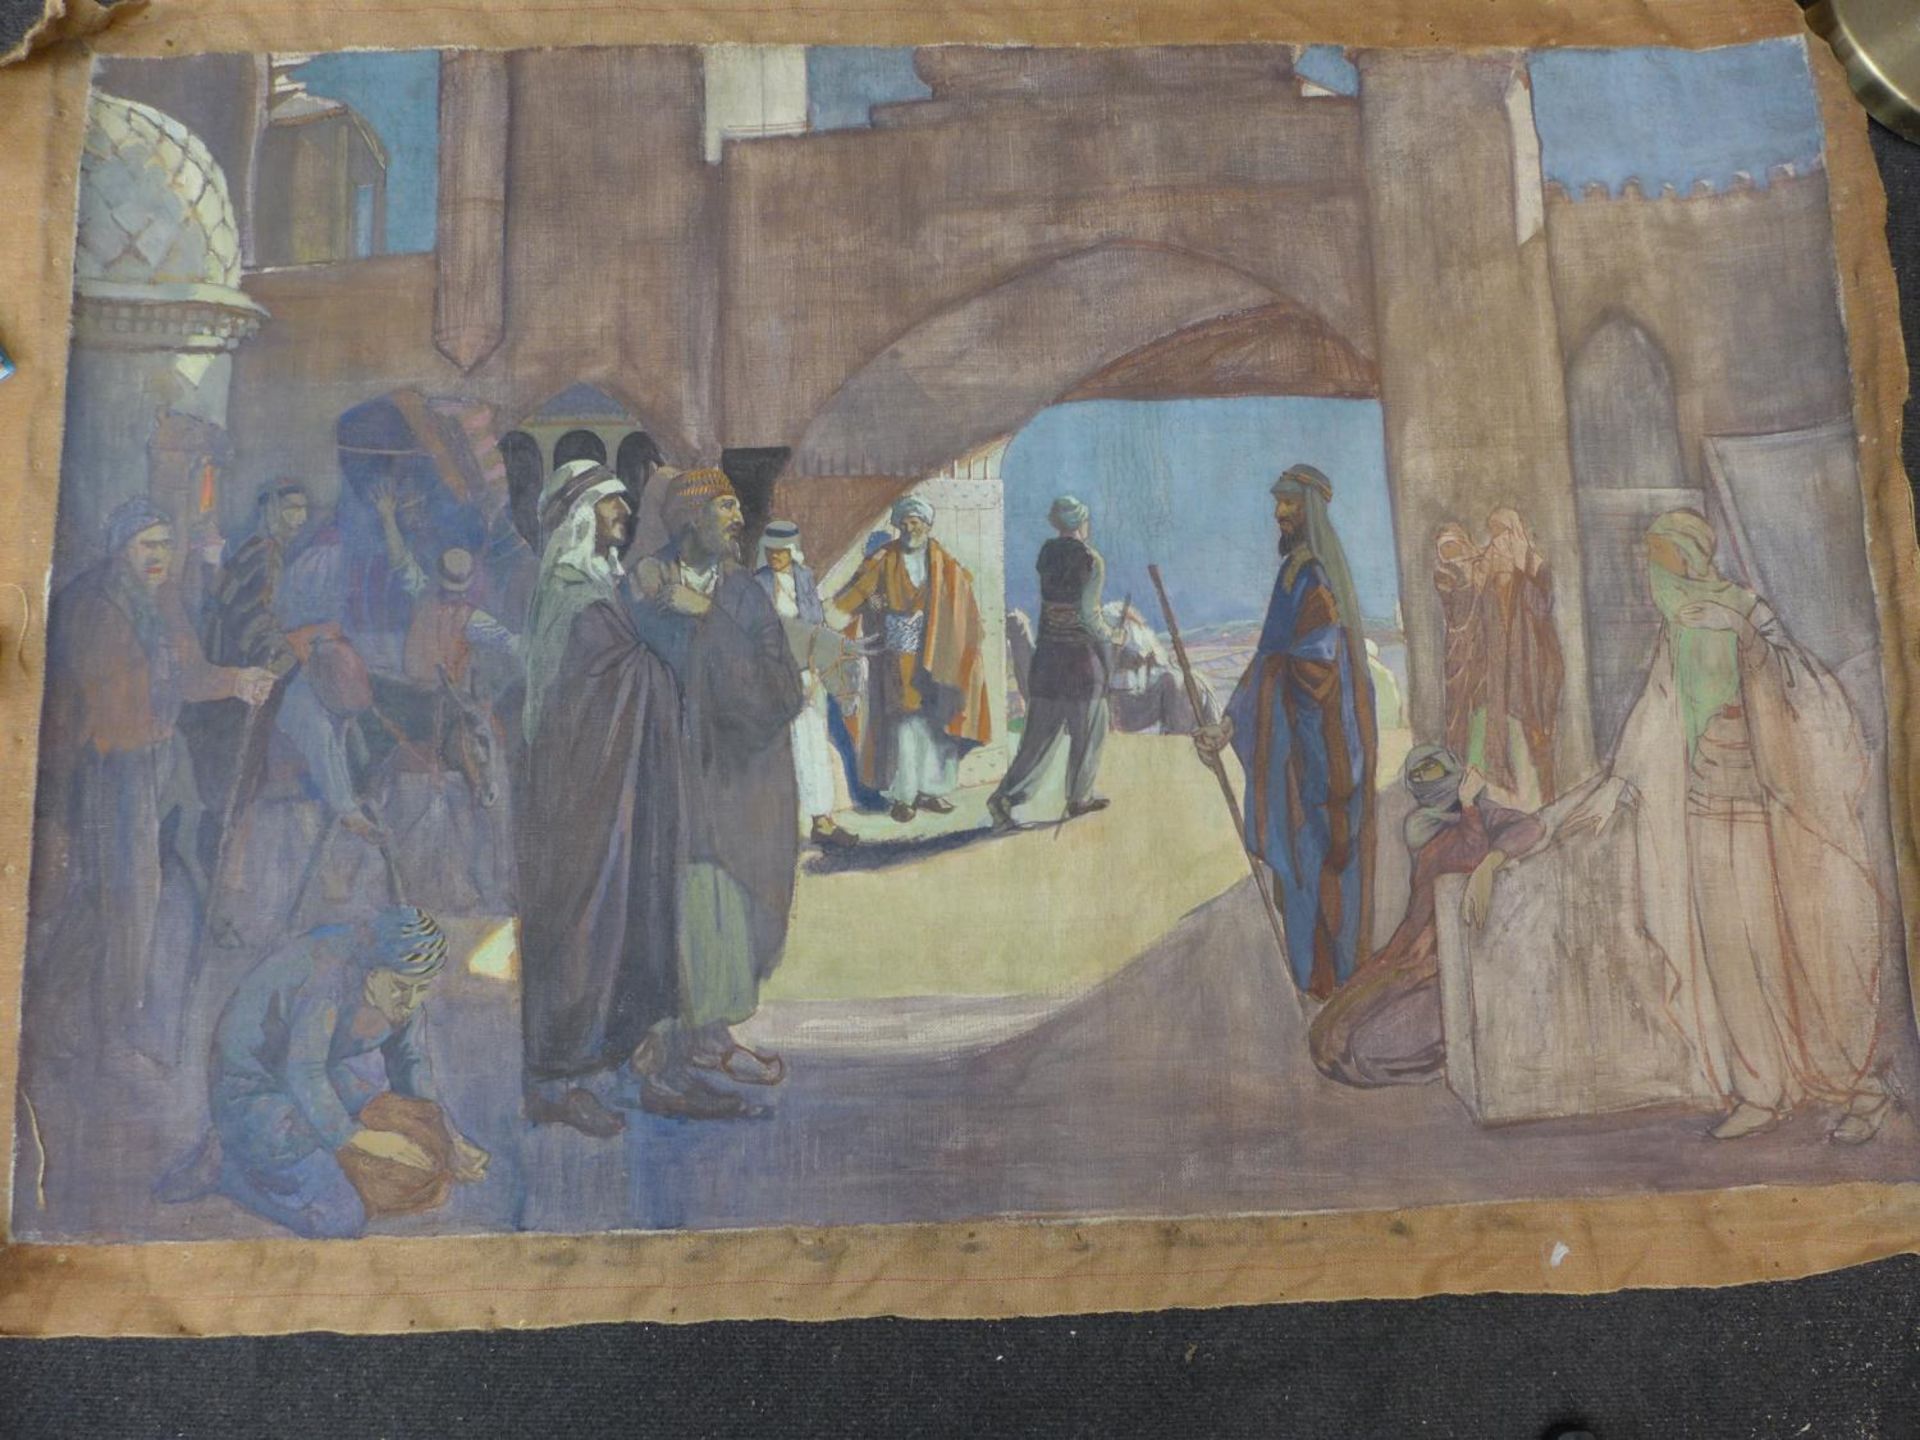 A LARGE EARLY 20TH CENTURY OIL ON CANVAS DEPICTING AN ARAB SCENE, 82X124CM